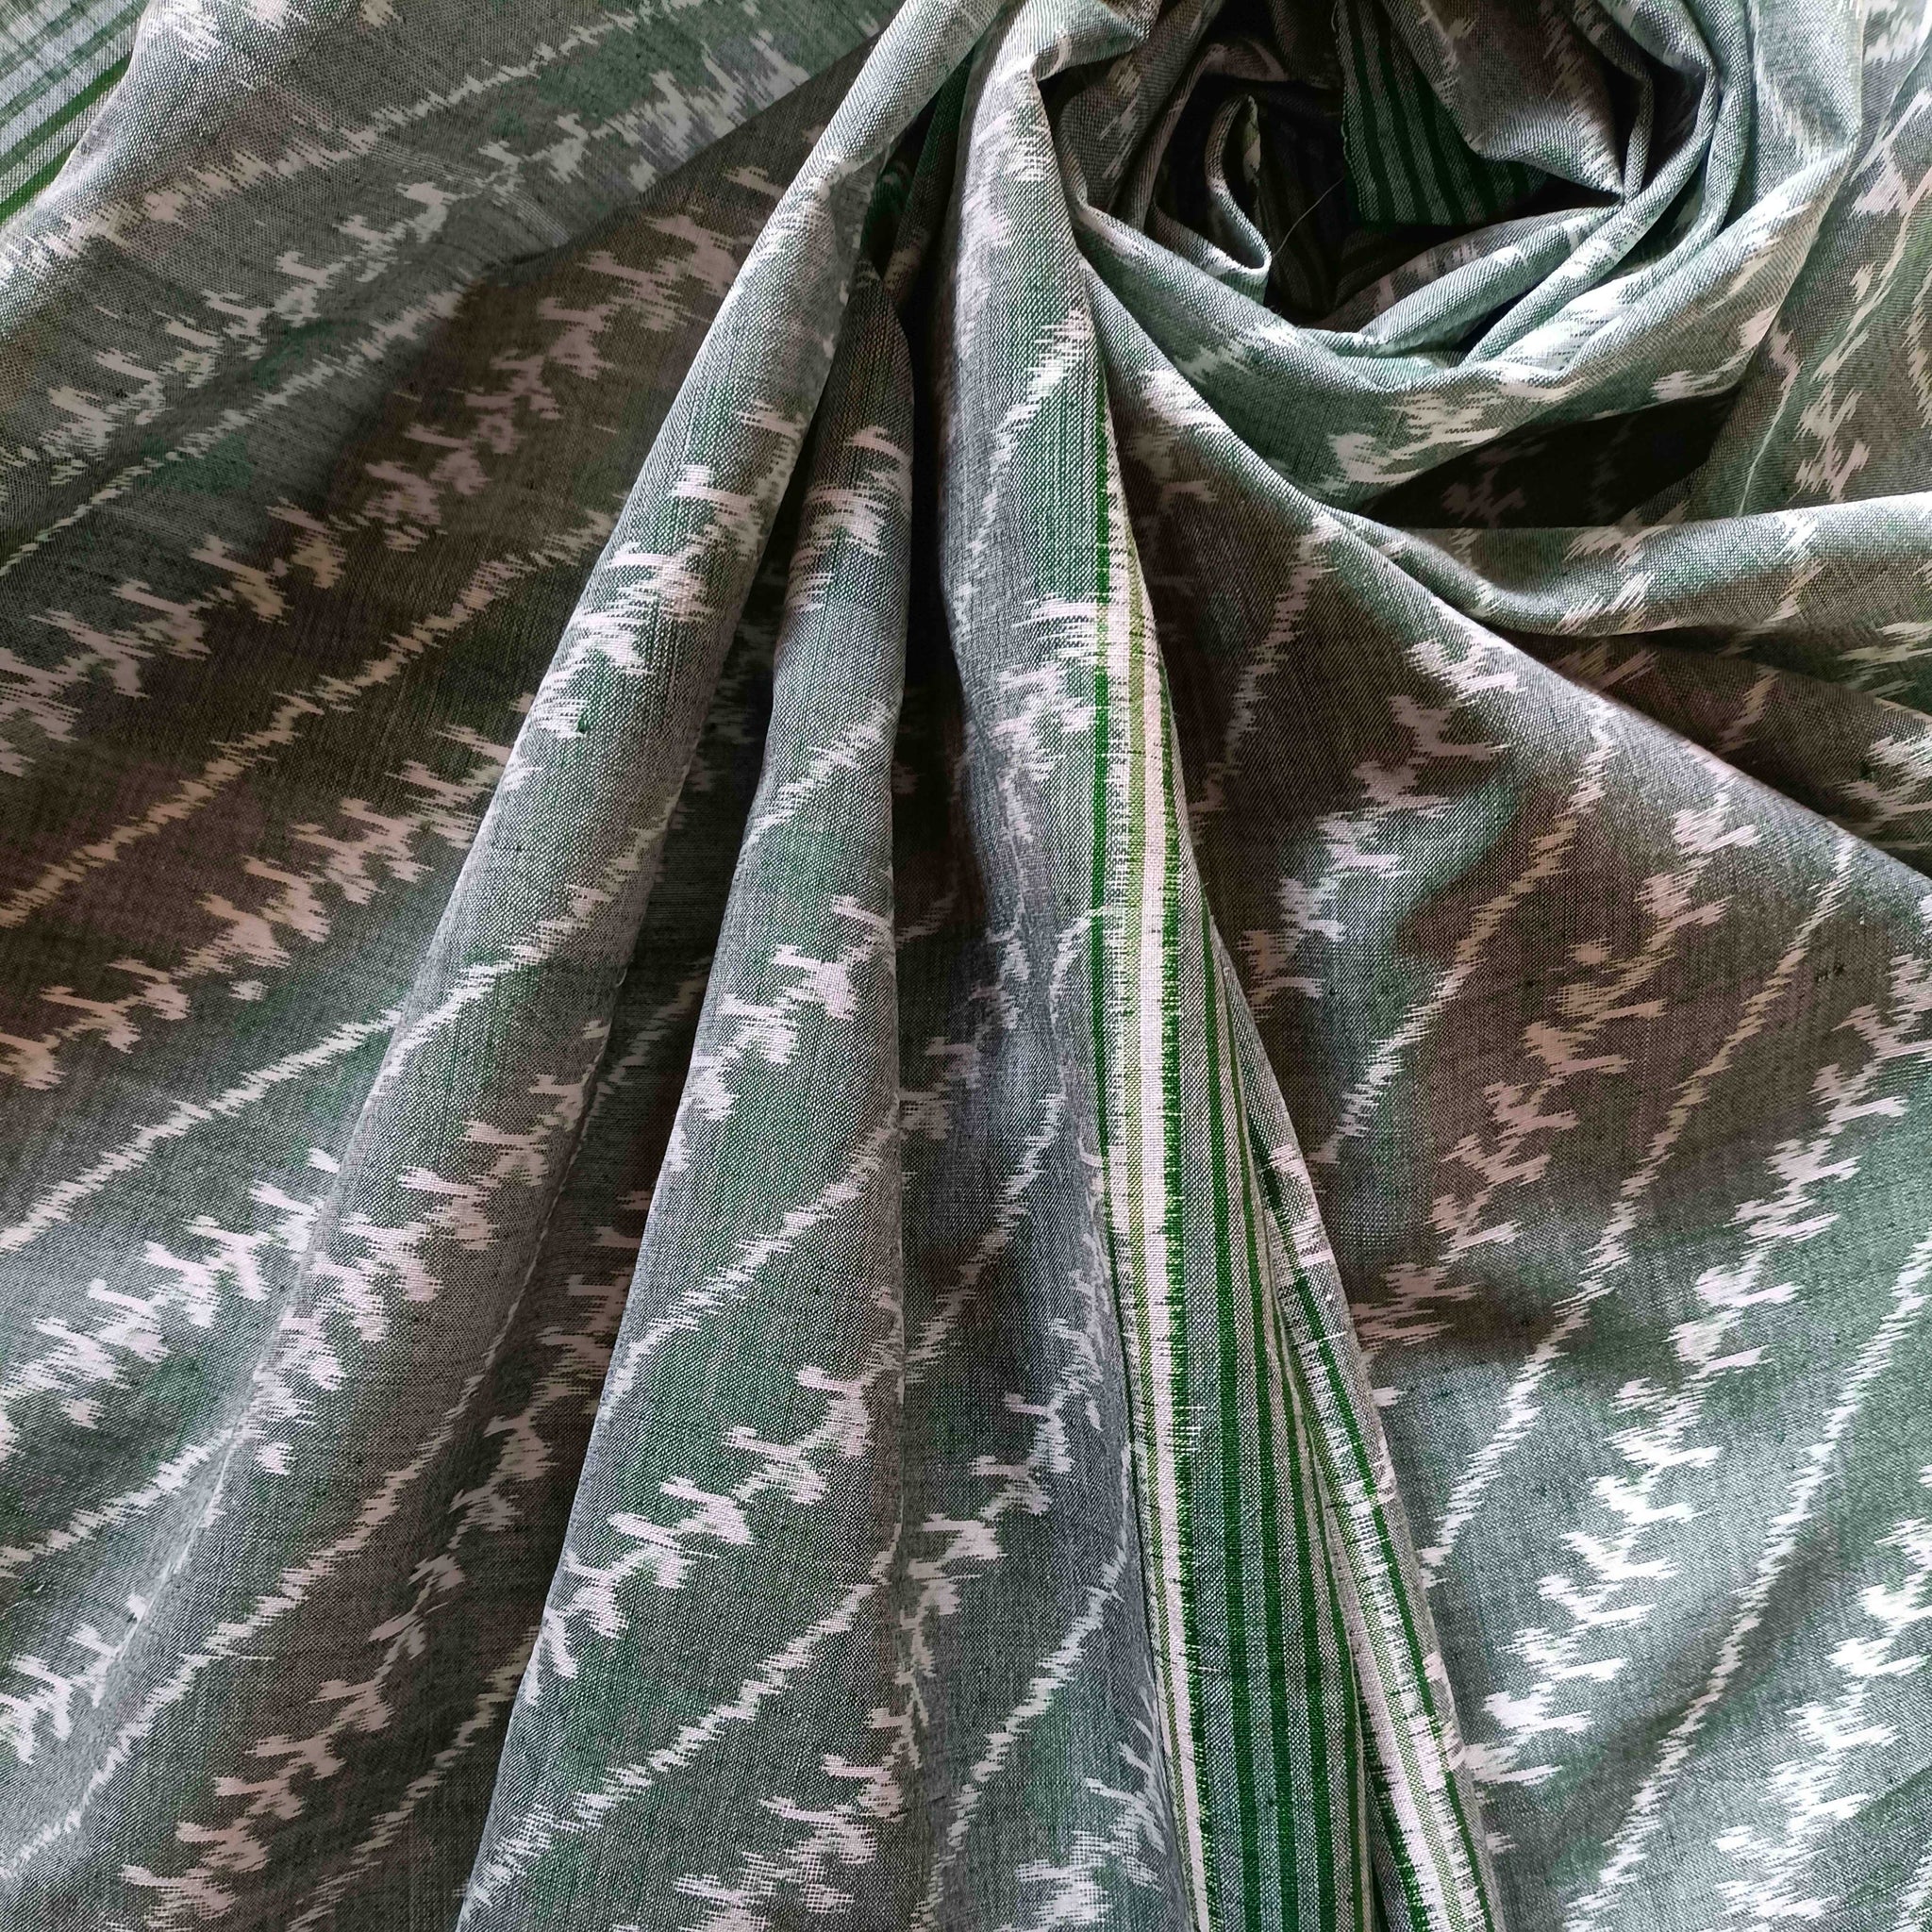 Green IKat Stole/Scarf with diagonal stripes